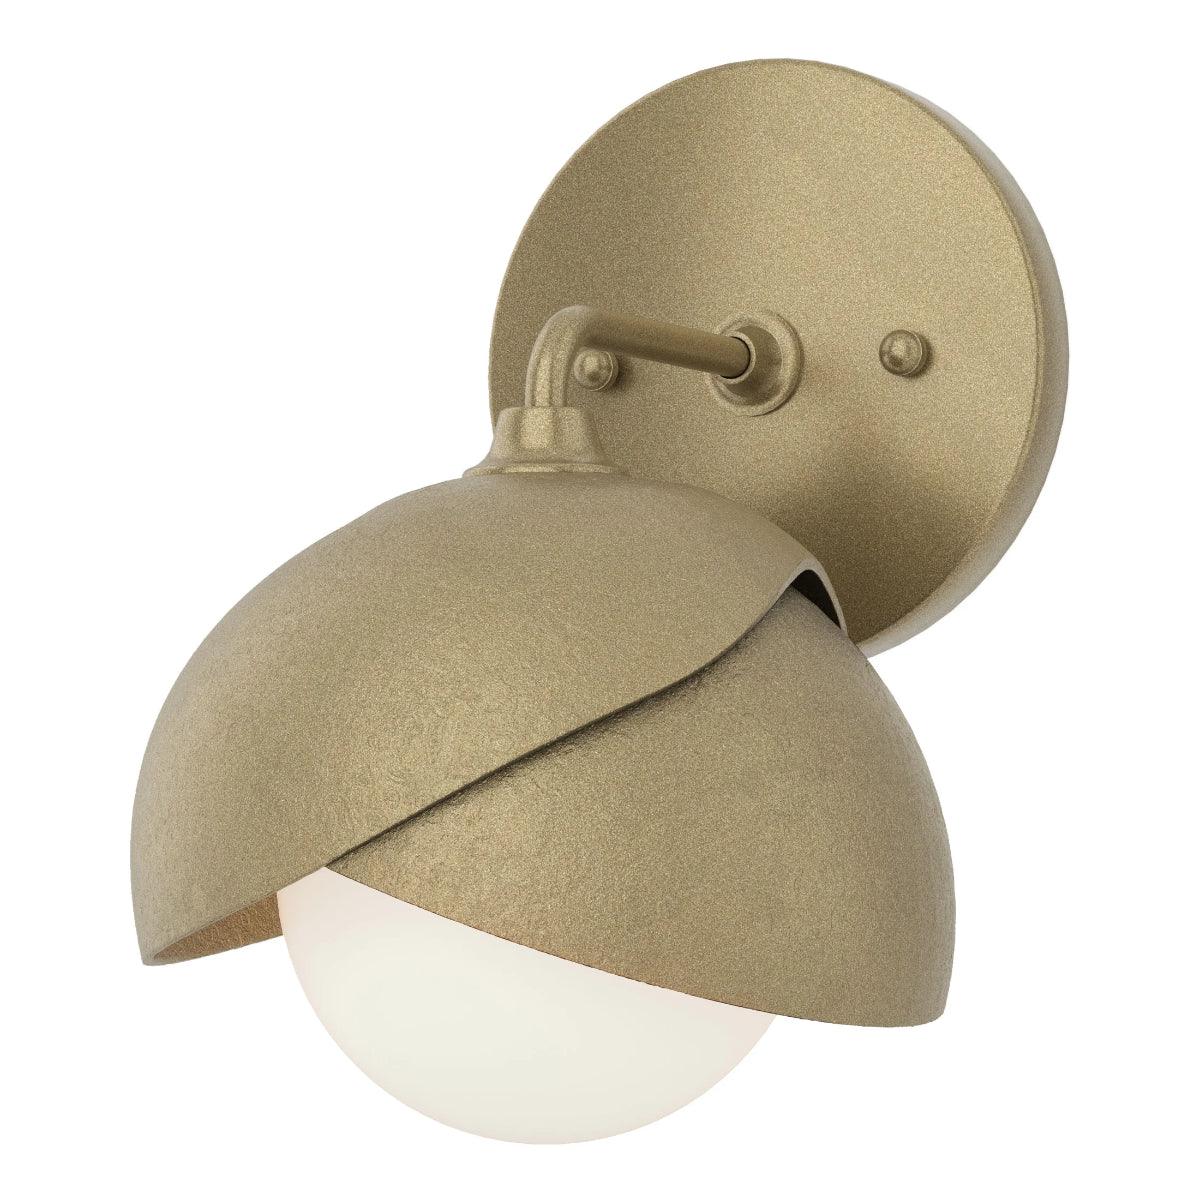 Brooklyn 9 in. Armed Sconce Soft Gold finish